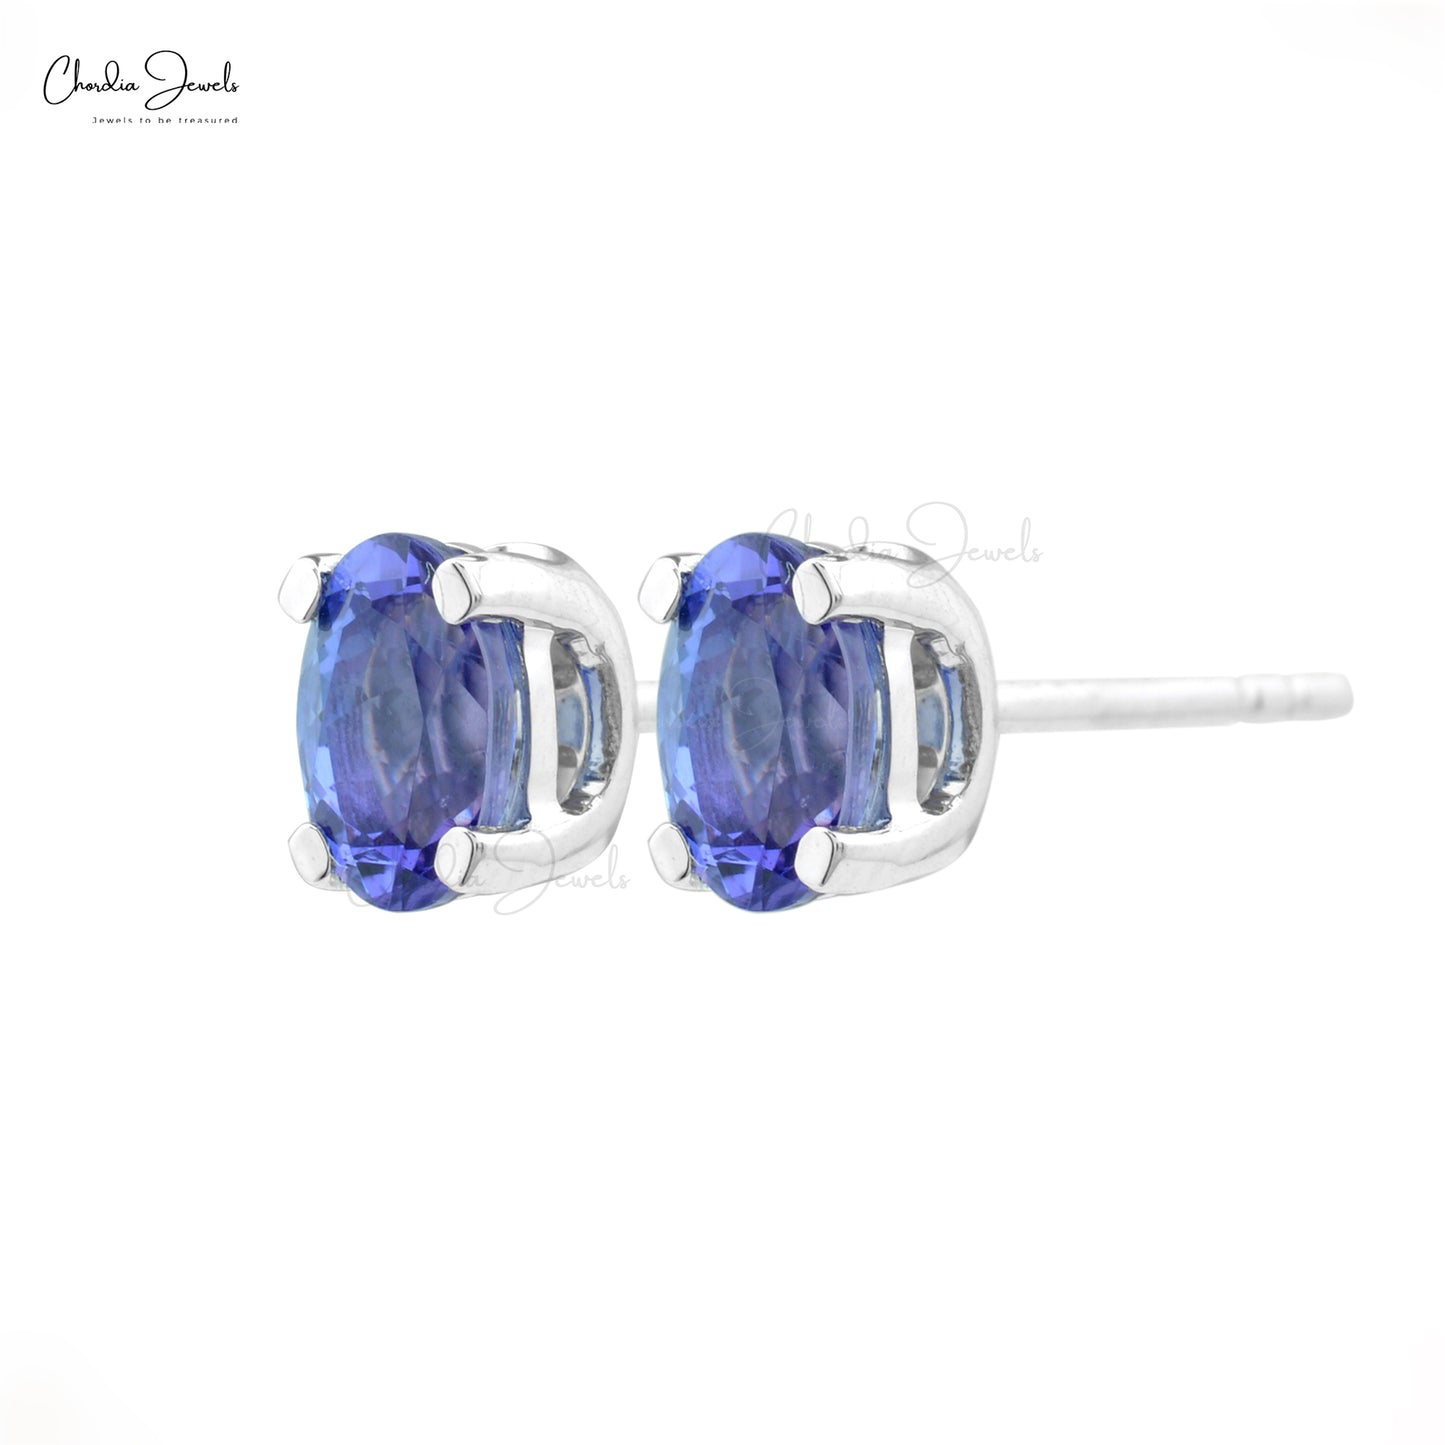 Sparkling Oval Tanzanite 1.08Ct Solitaire Studs Genuine 14k White Gold Push Back Earrings For December Birthstone